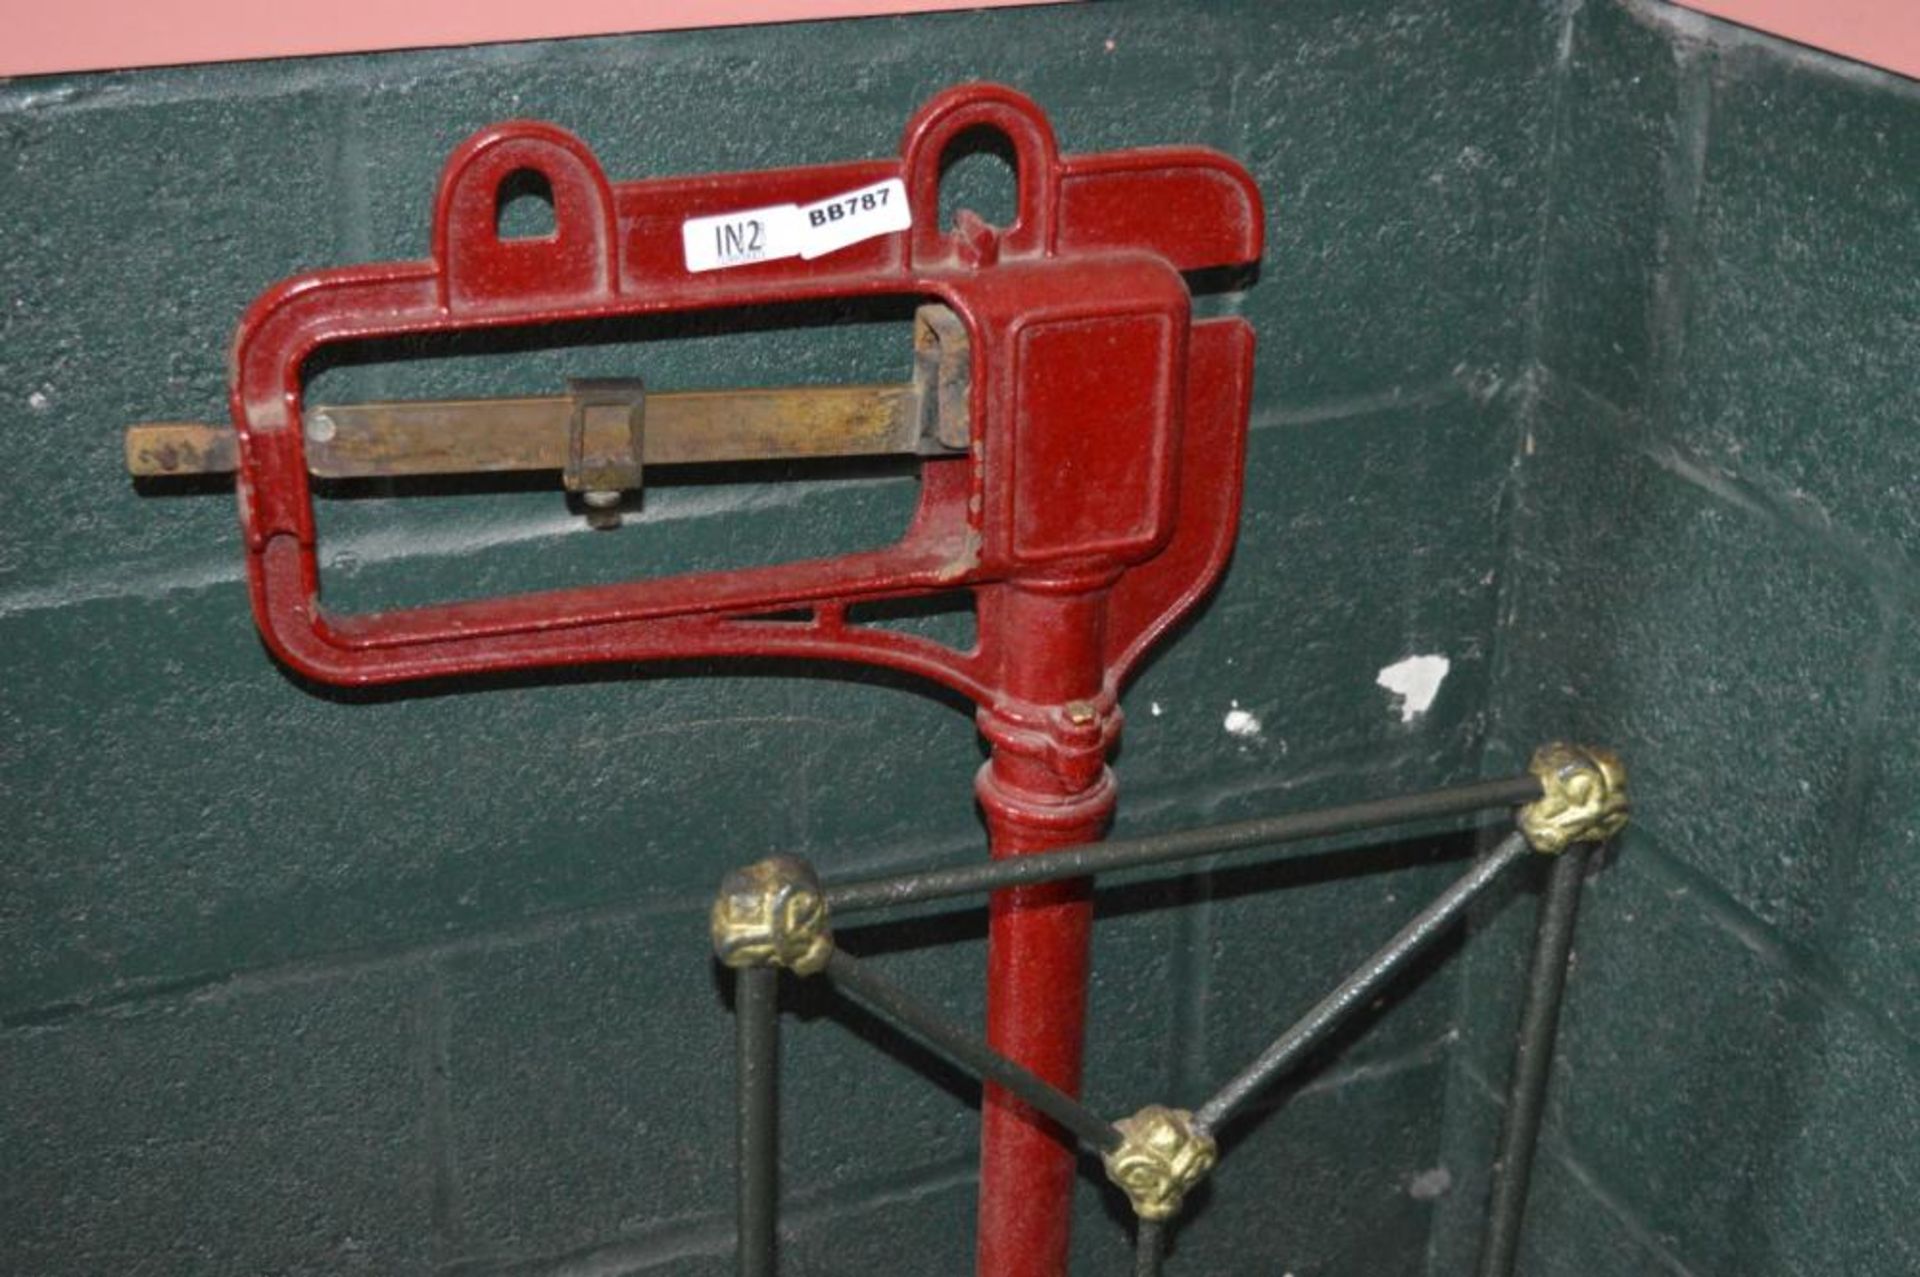 1 x Antique Floor Standing Weighing Scales by Day & Millward of Birmingham - Platform Size 24 x 24 I - Image 4 of 5